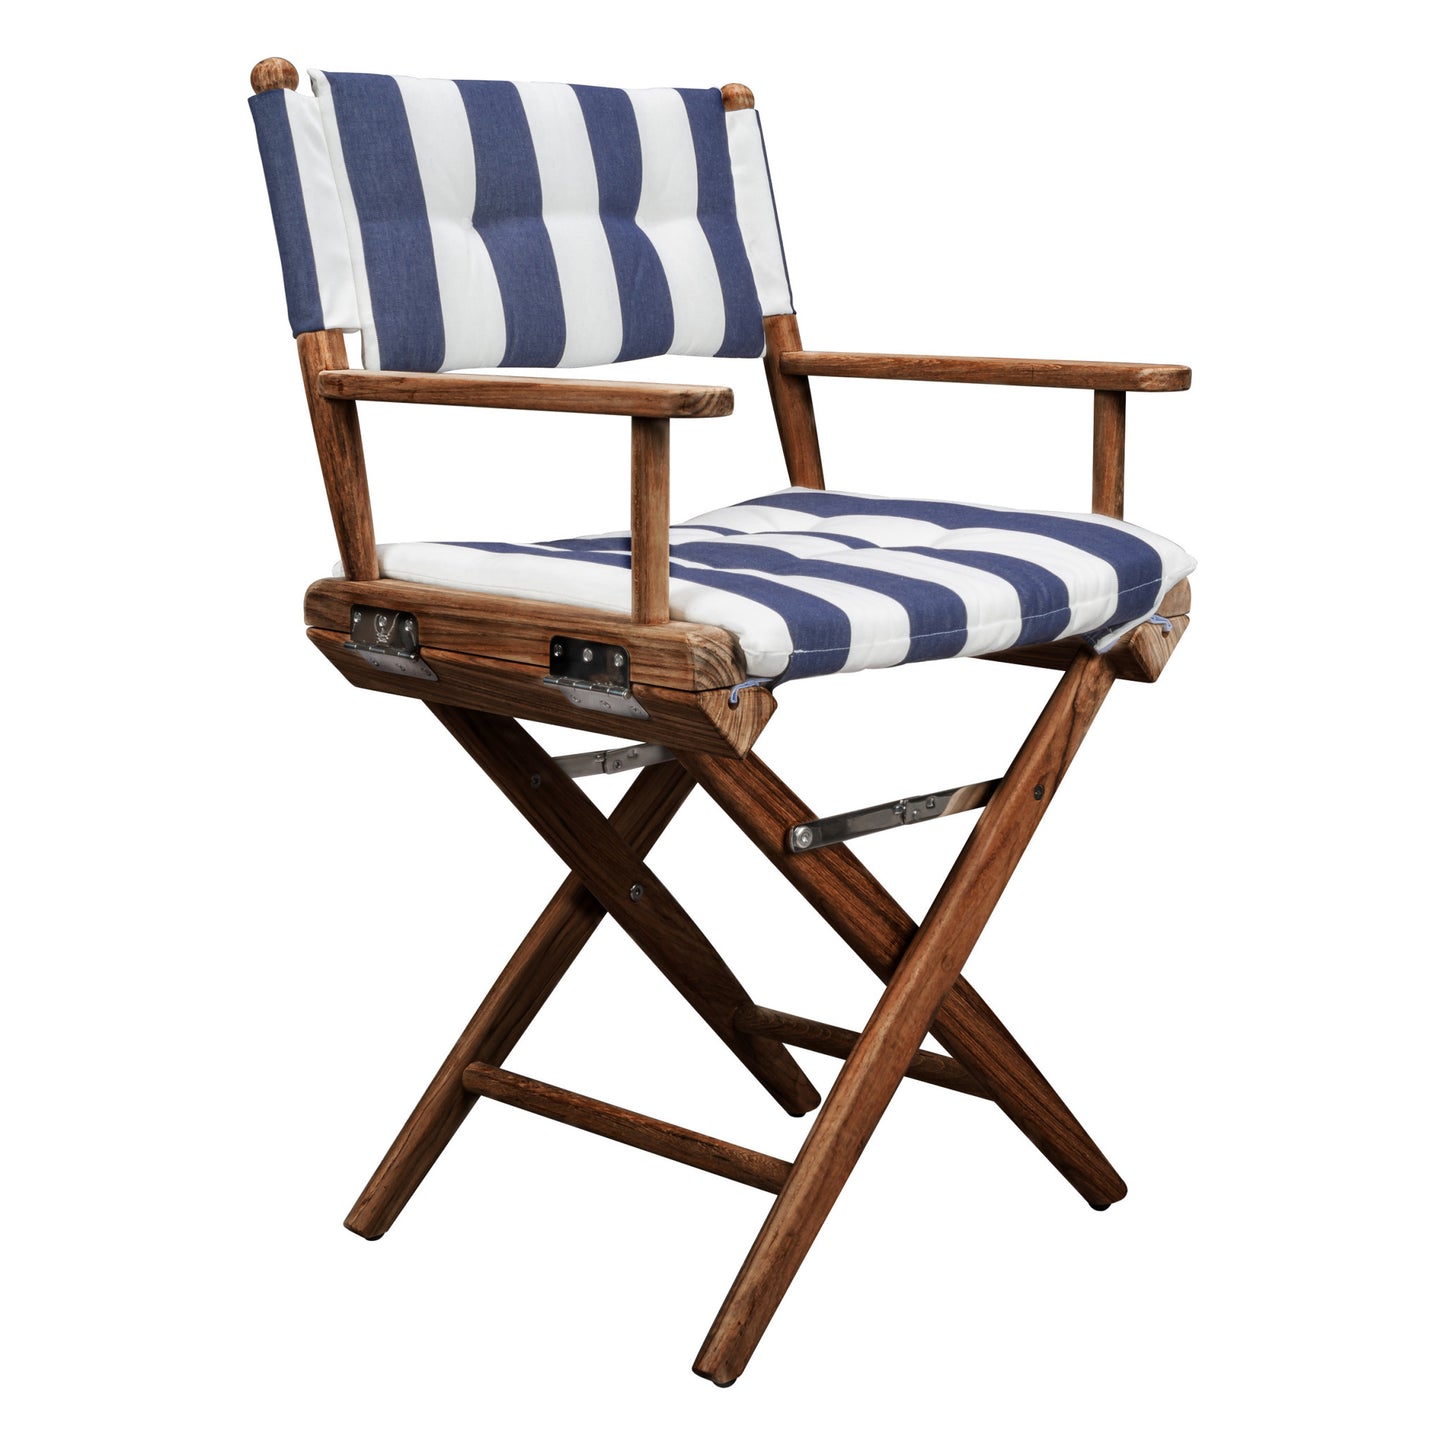 23" Blue and White and Natural Wood Solid Wood Indoor Outdoor Director Chair with Blue and White Cushion